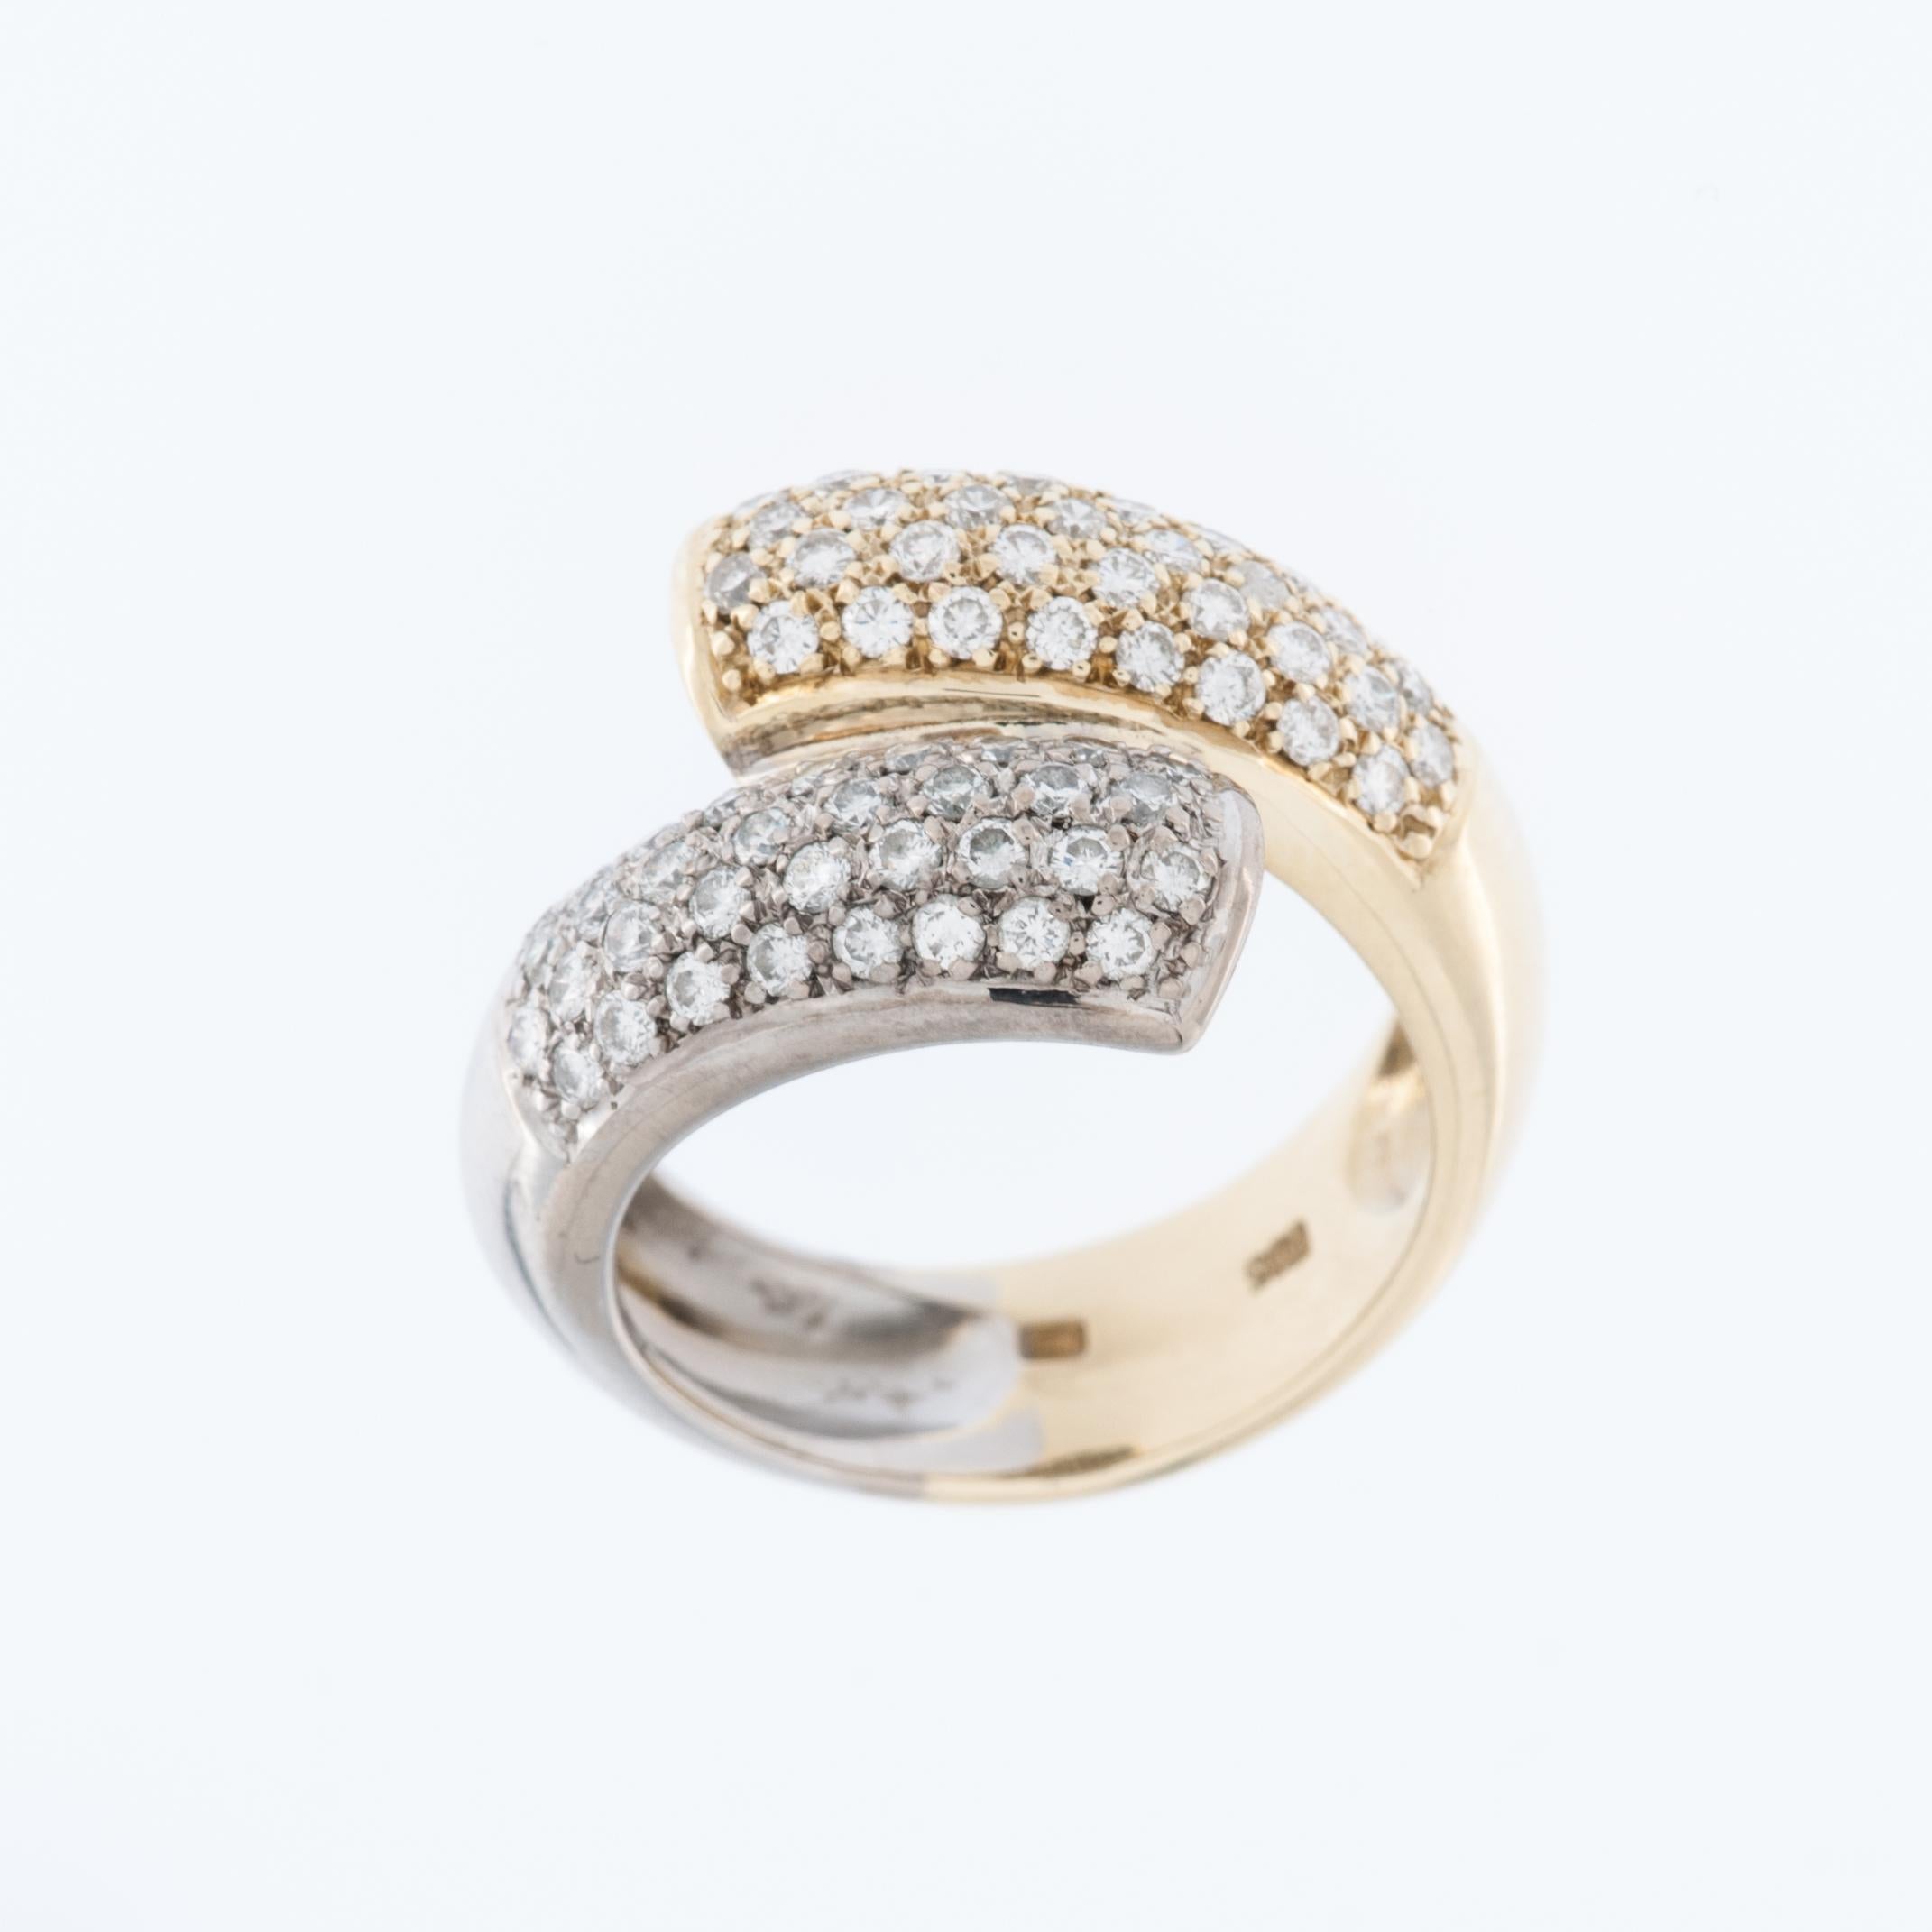 This modern half yellow and half white gold diamond cocktail crossover Swiss ring is a special piece of jewelry. The ring features a design where the band splits into two halves, with one half made of yellow gold and the other half made of white